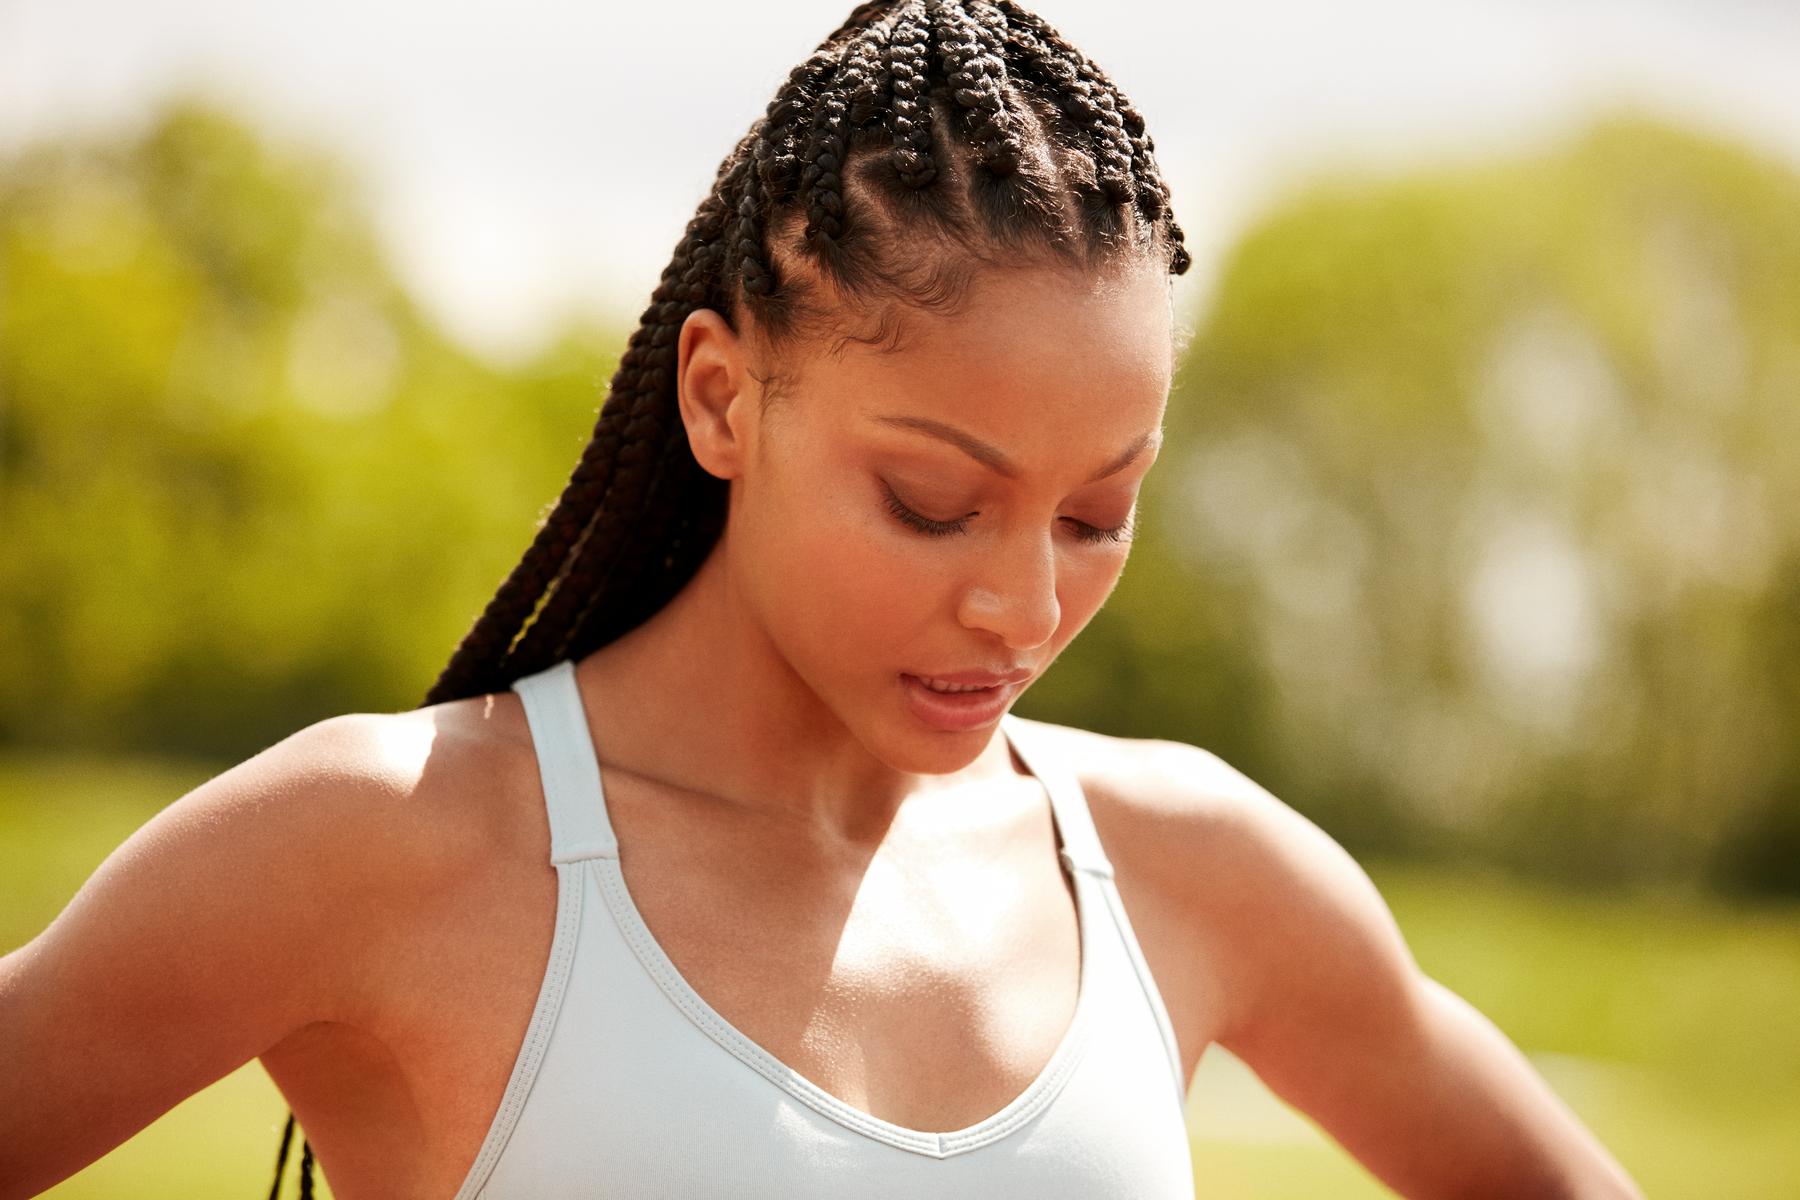 Looking To Re-Invigorate Your Routine? Here’s How To Get Out Of That Rut